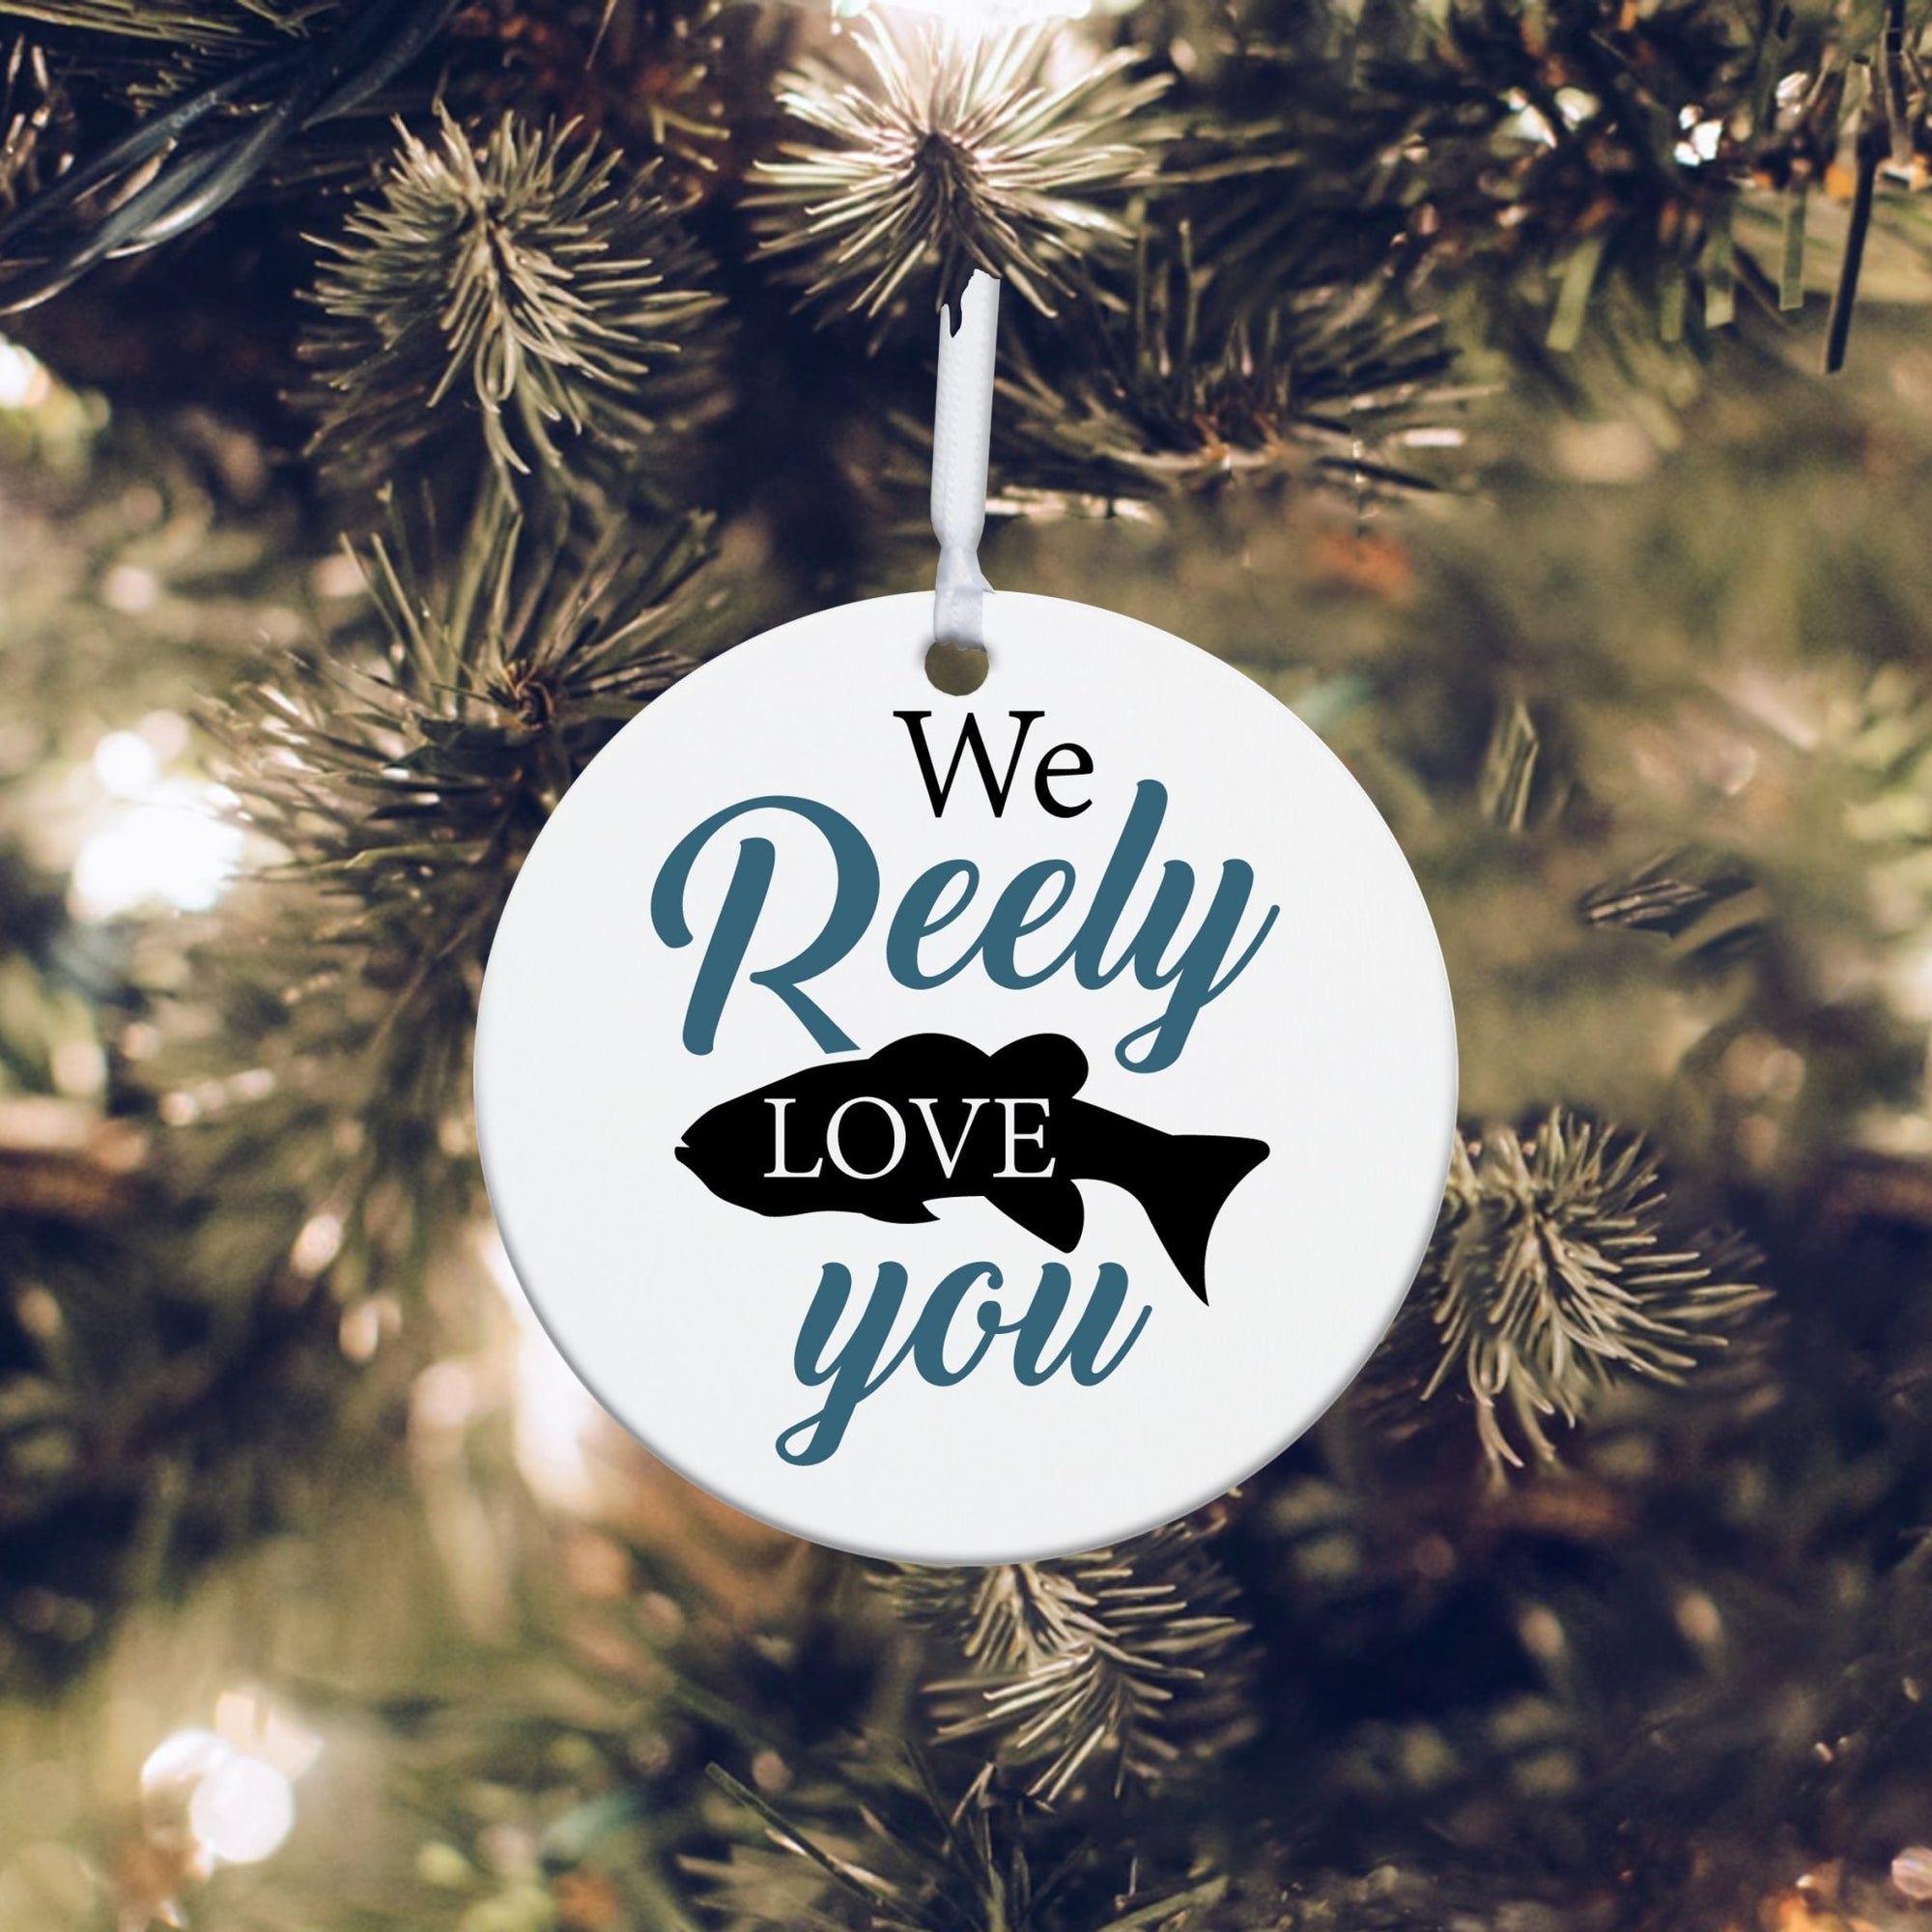 Fishing Dad White Ornament With Inspirational Message Gift Ideas - We Reely Love You!